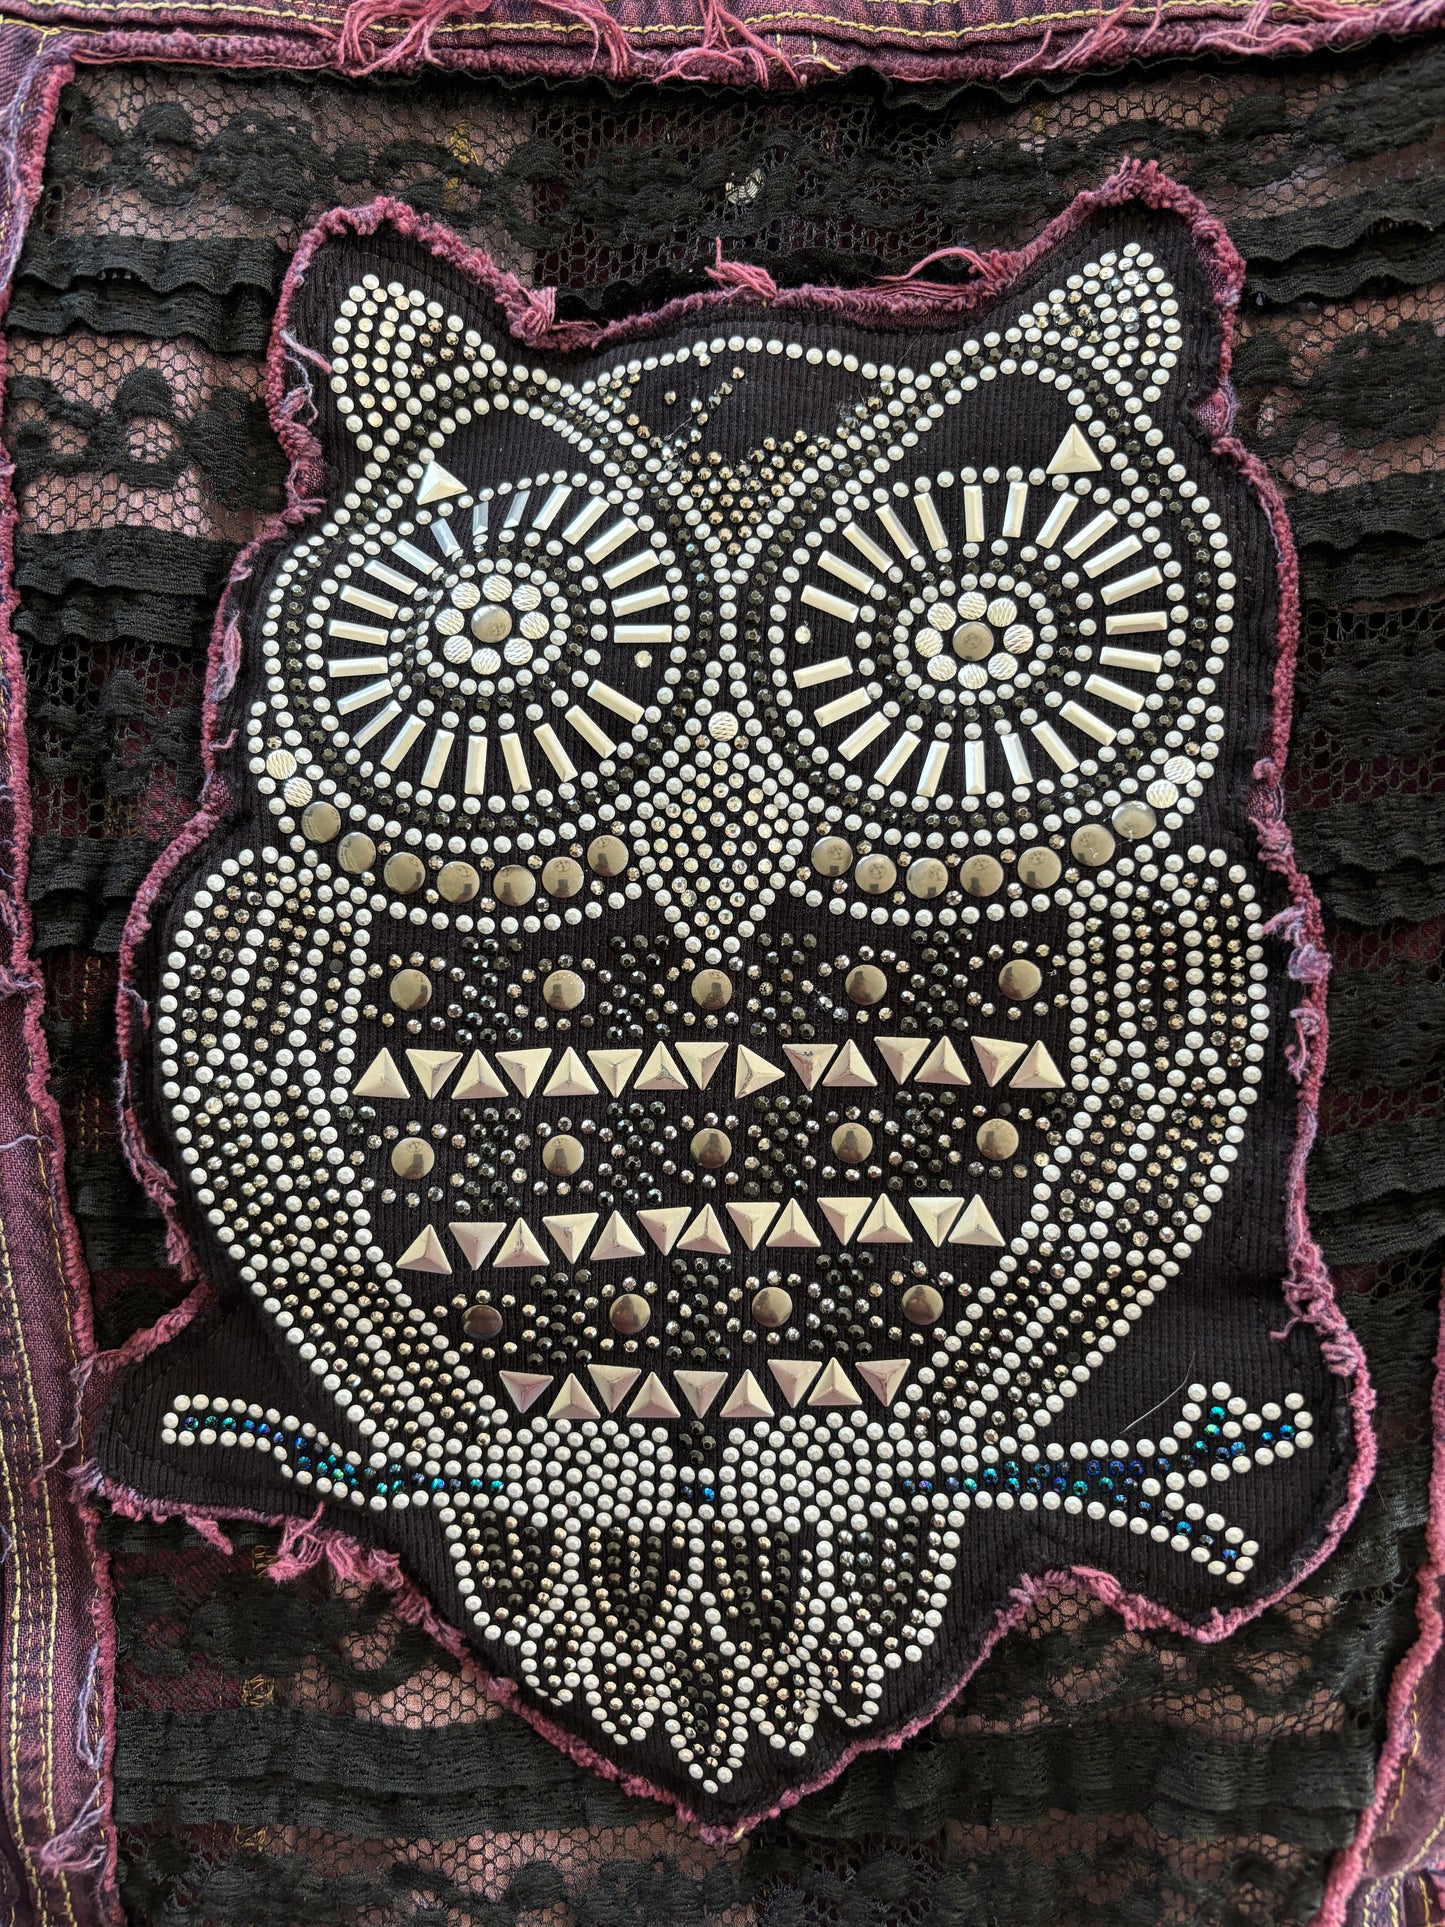 Up-cycled Owl Applique on Dyed Denim Jacket, Purple